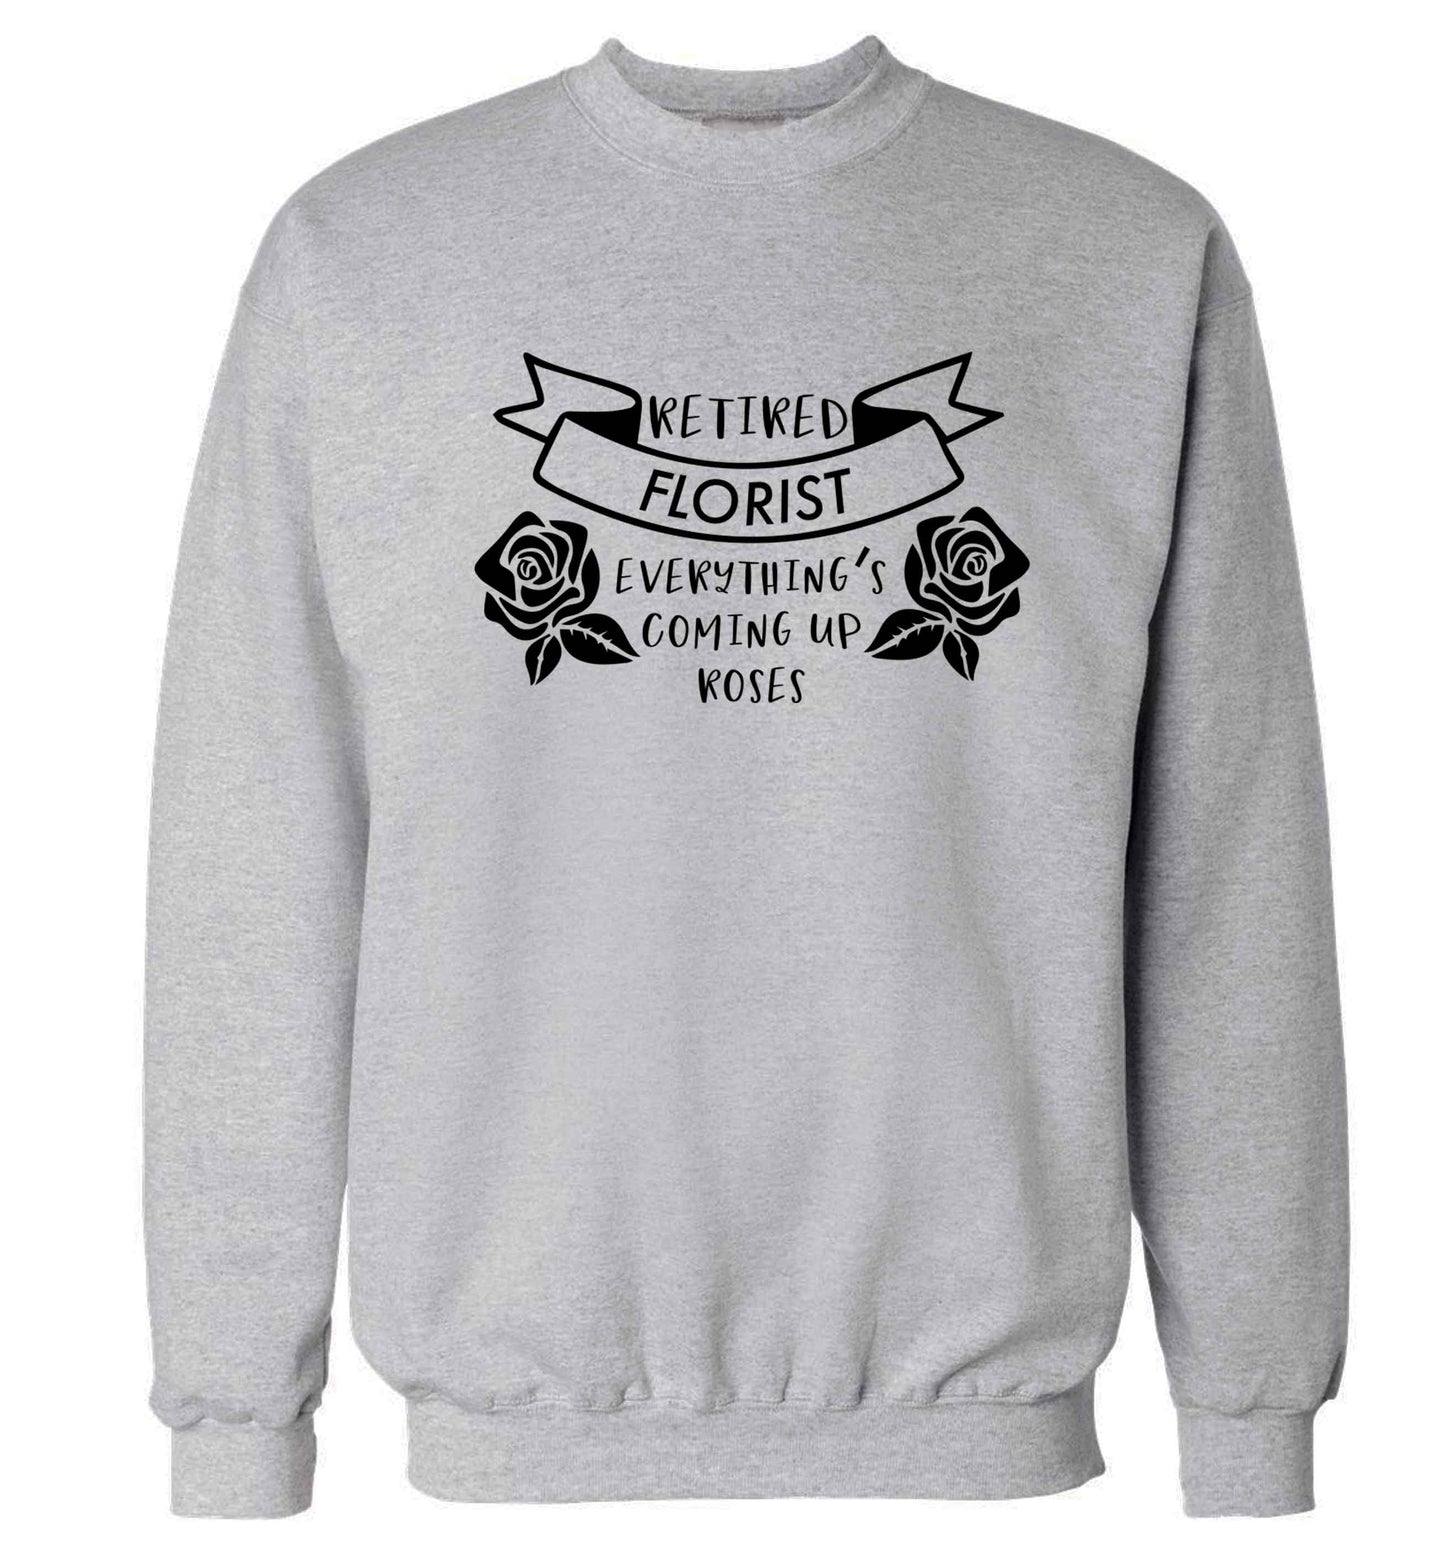 Retired florist everything's coming up roses Adult's unisex grey Sweater 2XL